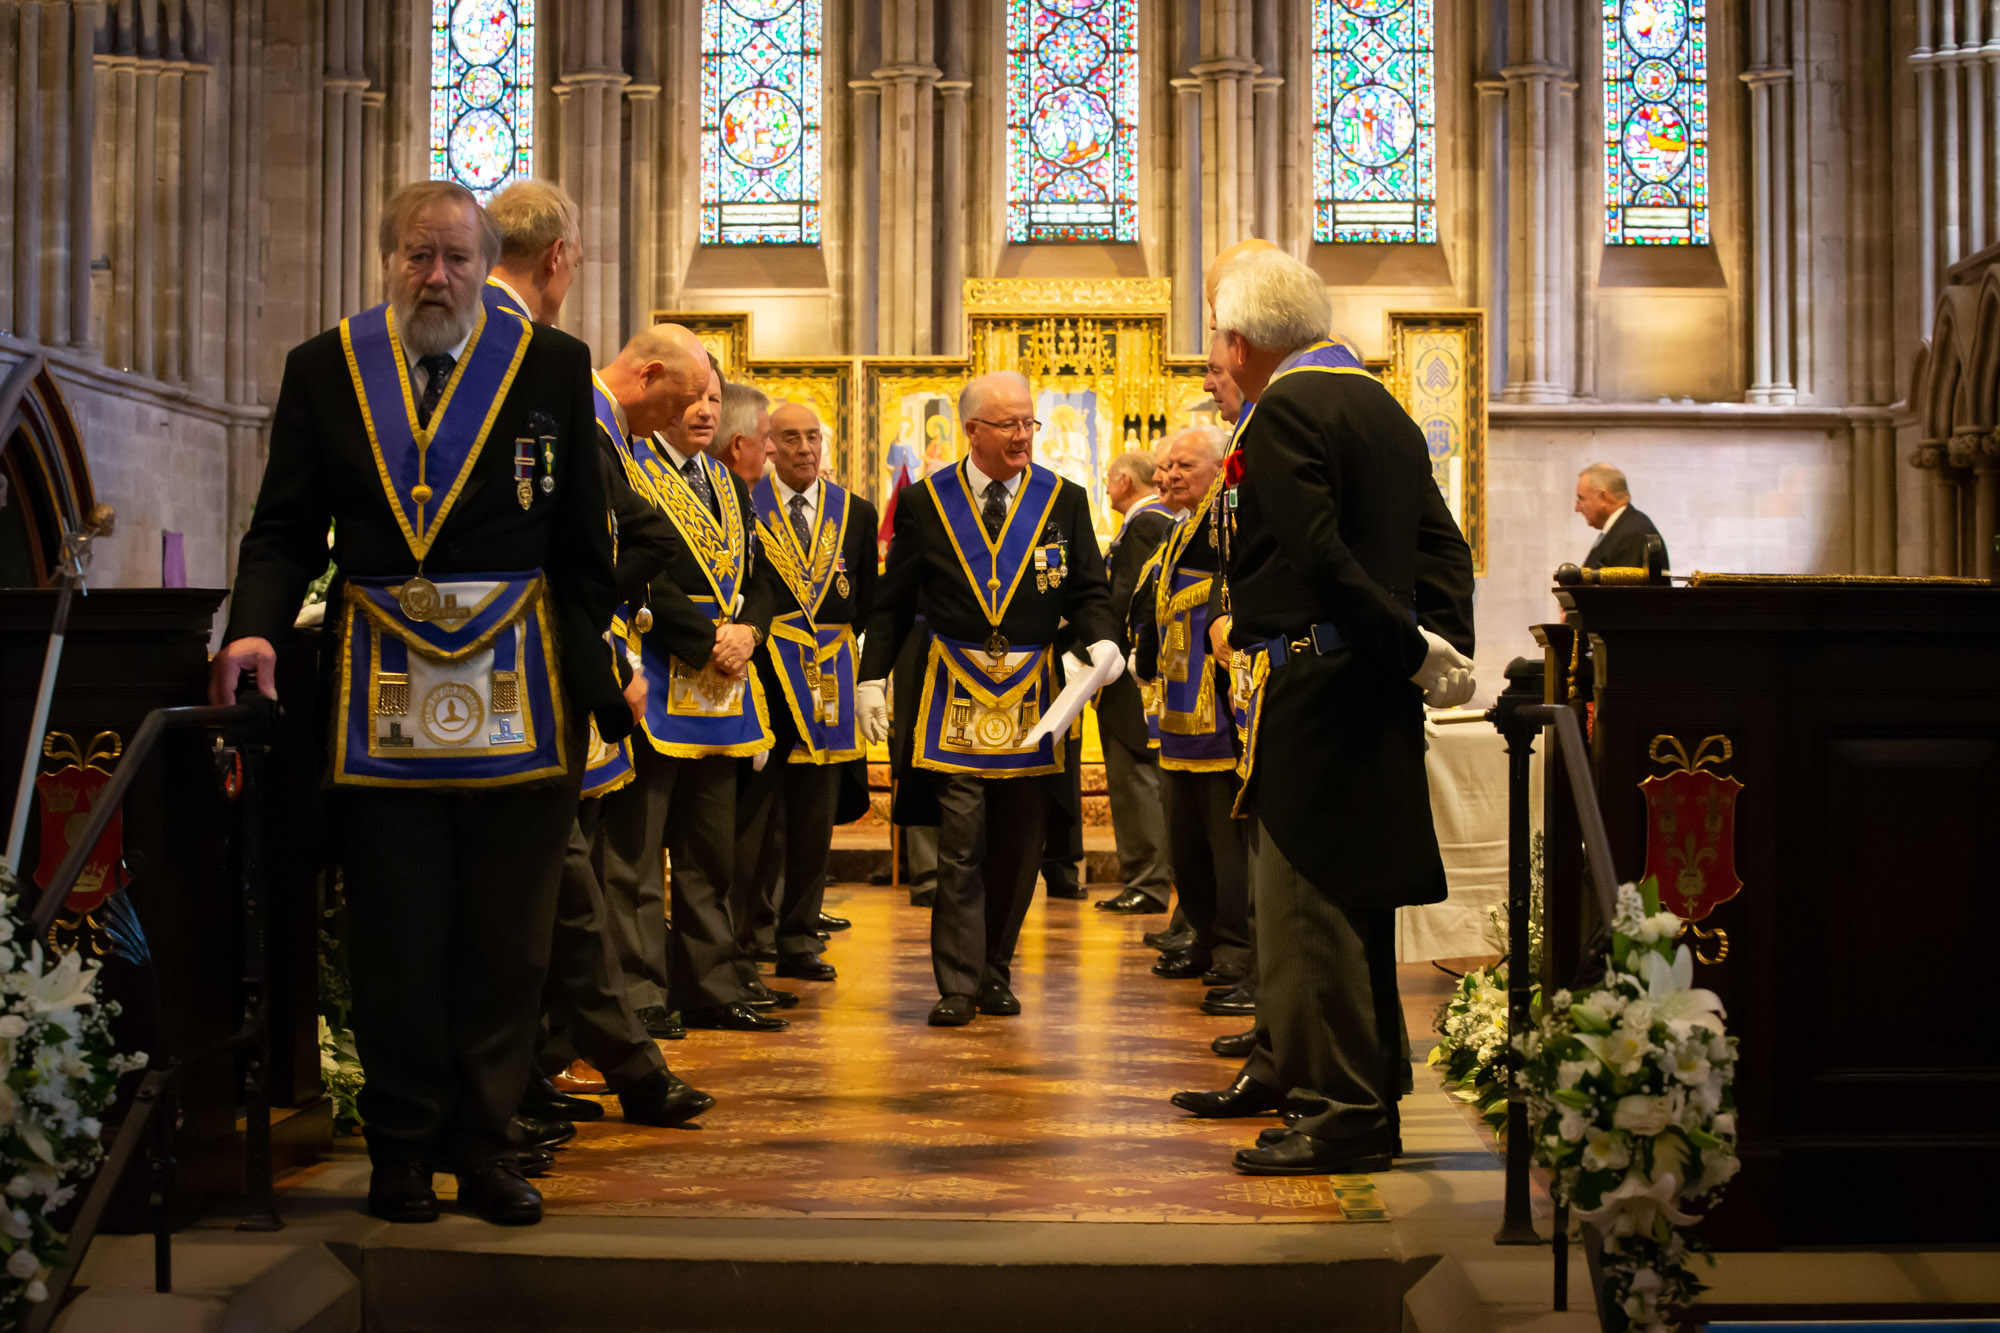 Photo inside the Cathedral The Prov GDC W Bro Mike Rushgrove checking everyone before processing into the Cathedral